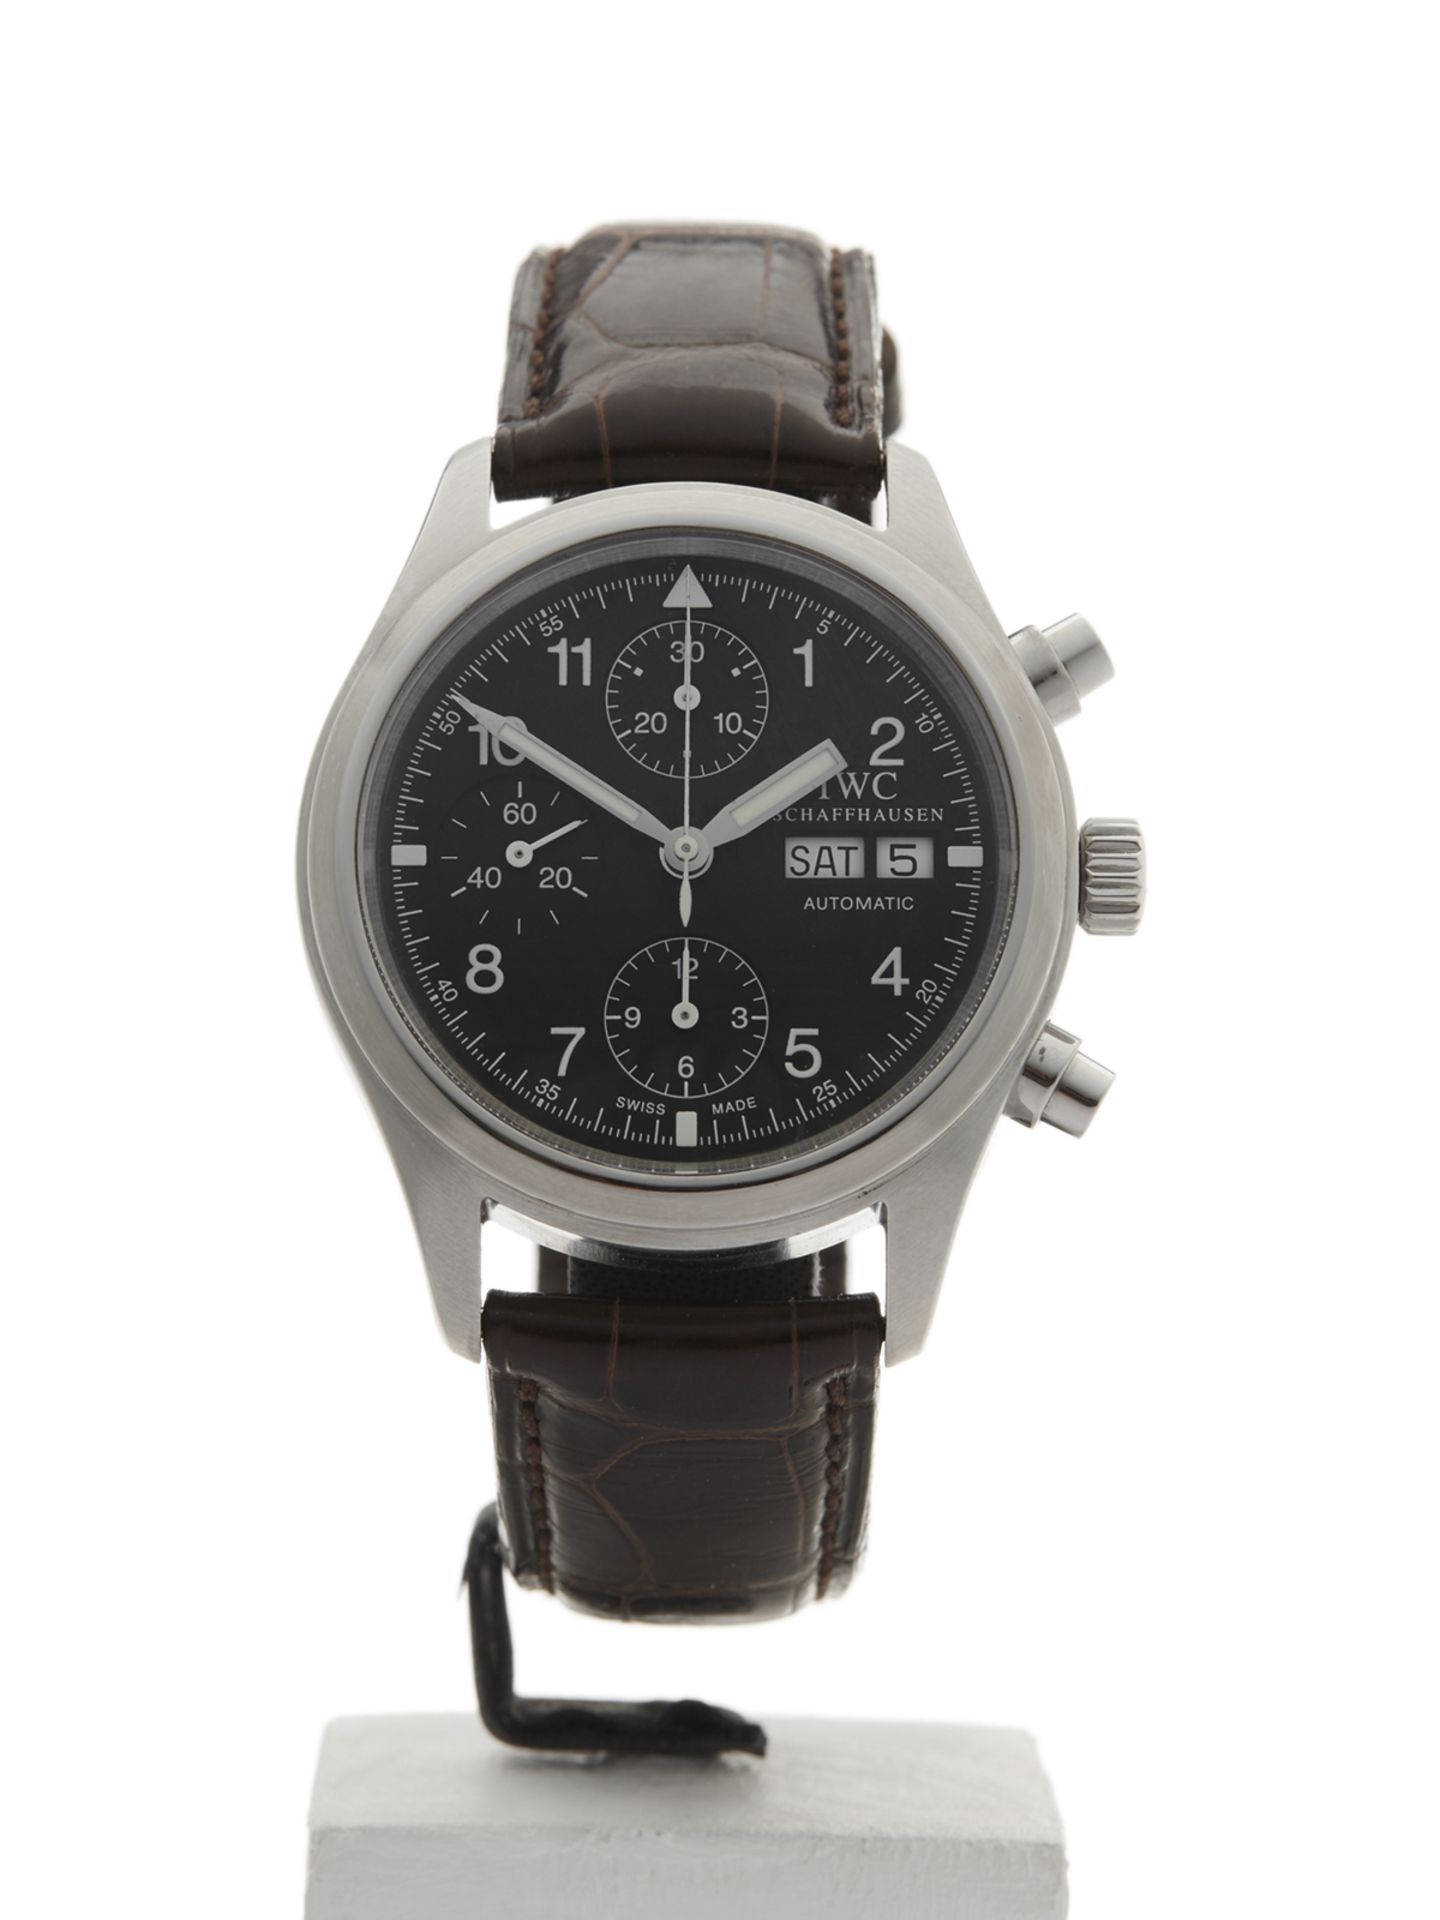 IWC Pilot's Chronograph Fliegerchronograph 39mm Stainless Steel IW3706